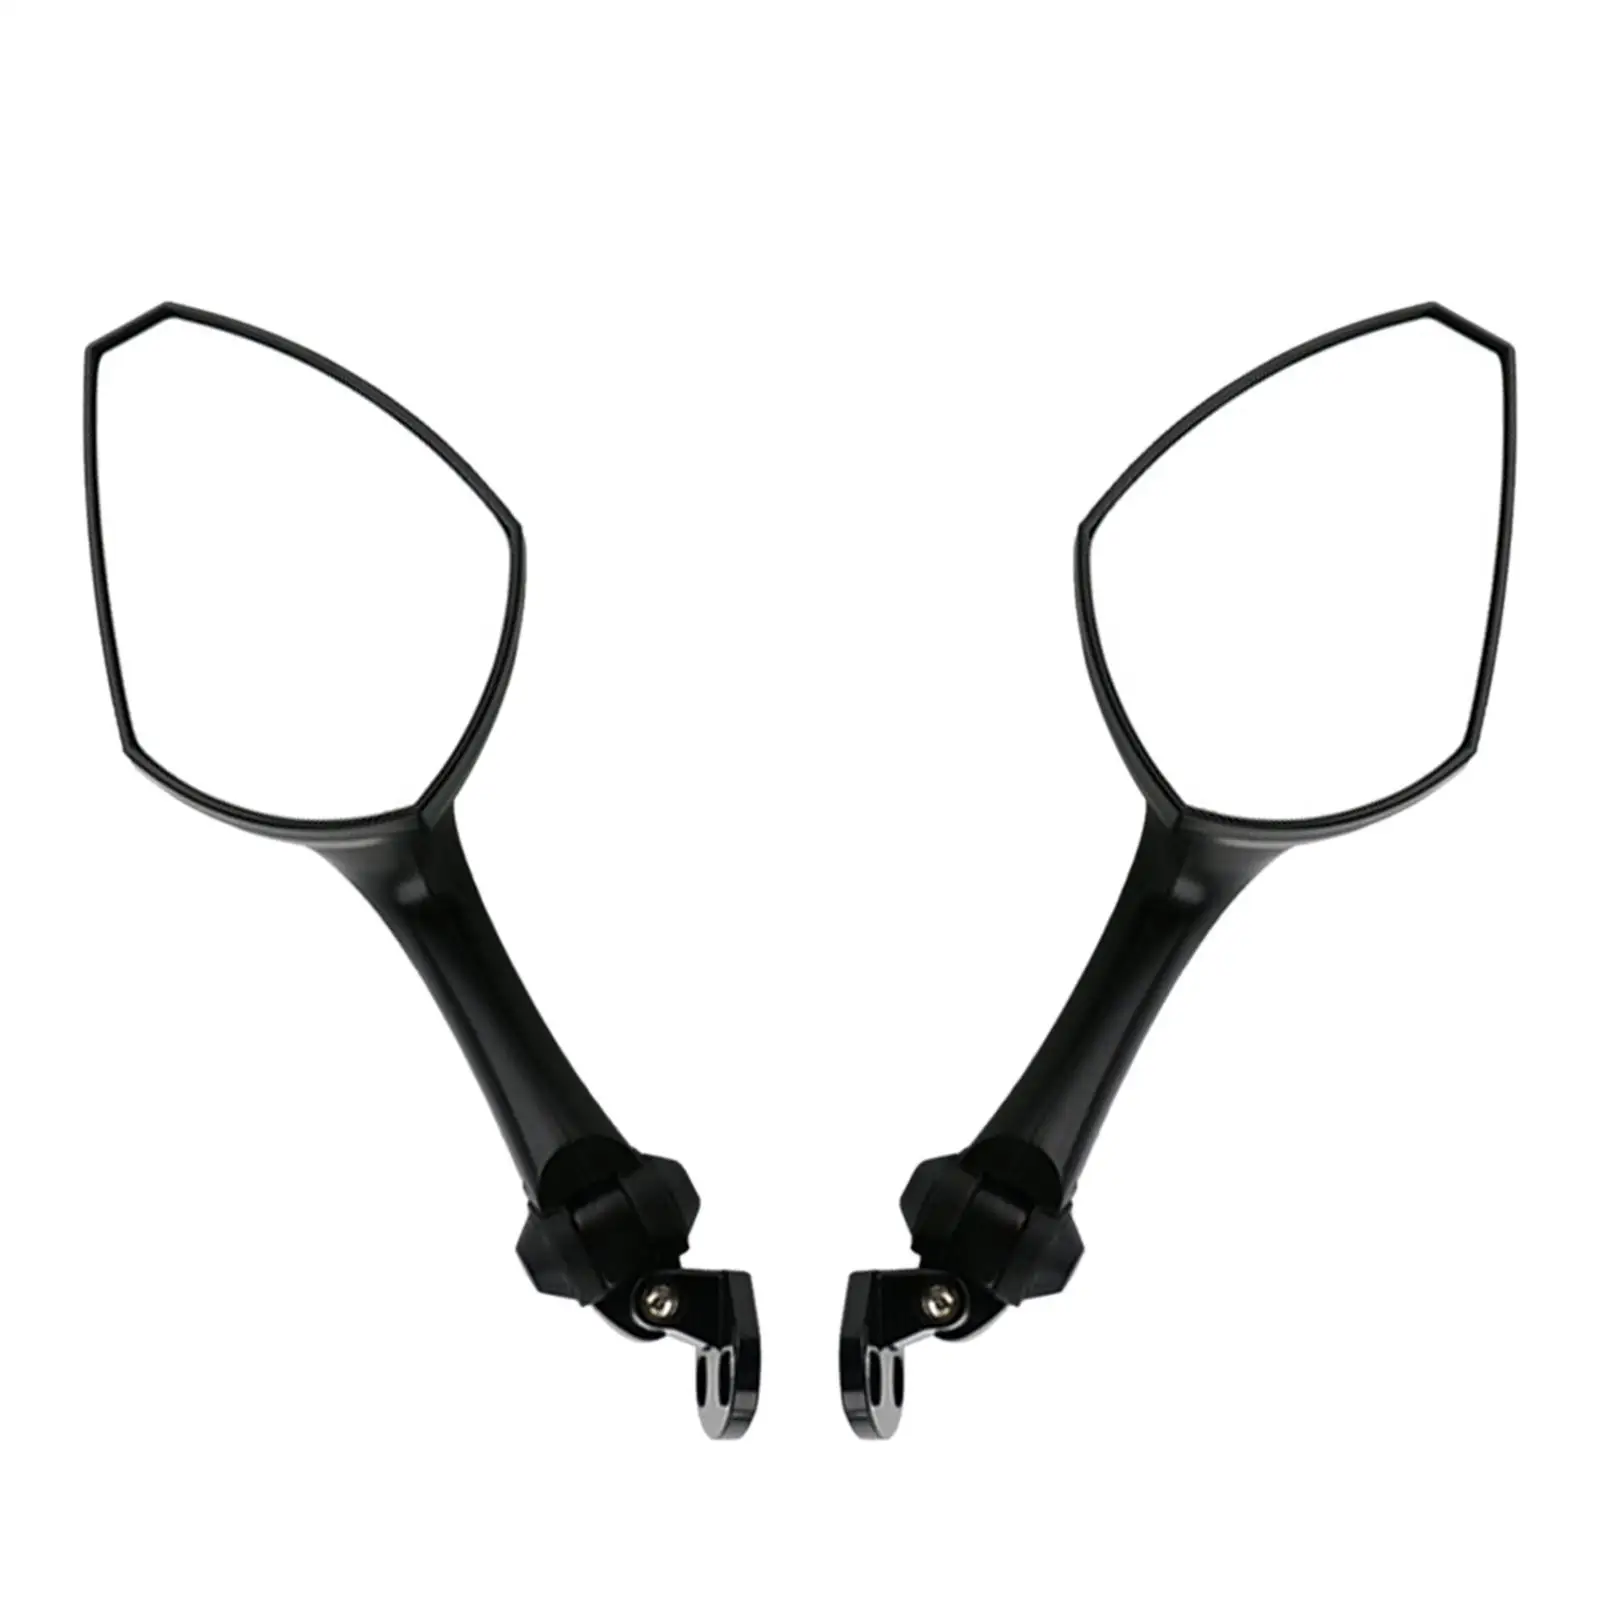 2x Motorbike Rear View Mirror Wind Wing Side Mirror Spare Parts Replacement Motorcycle Modification